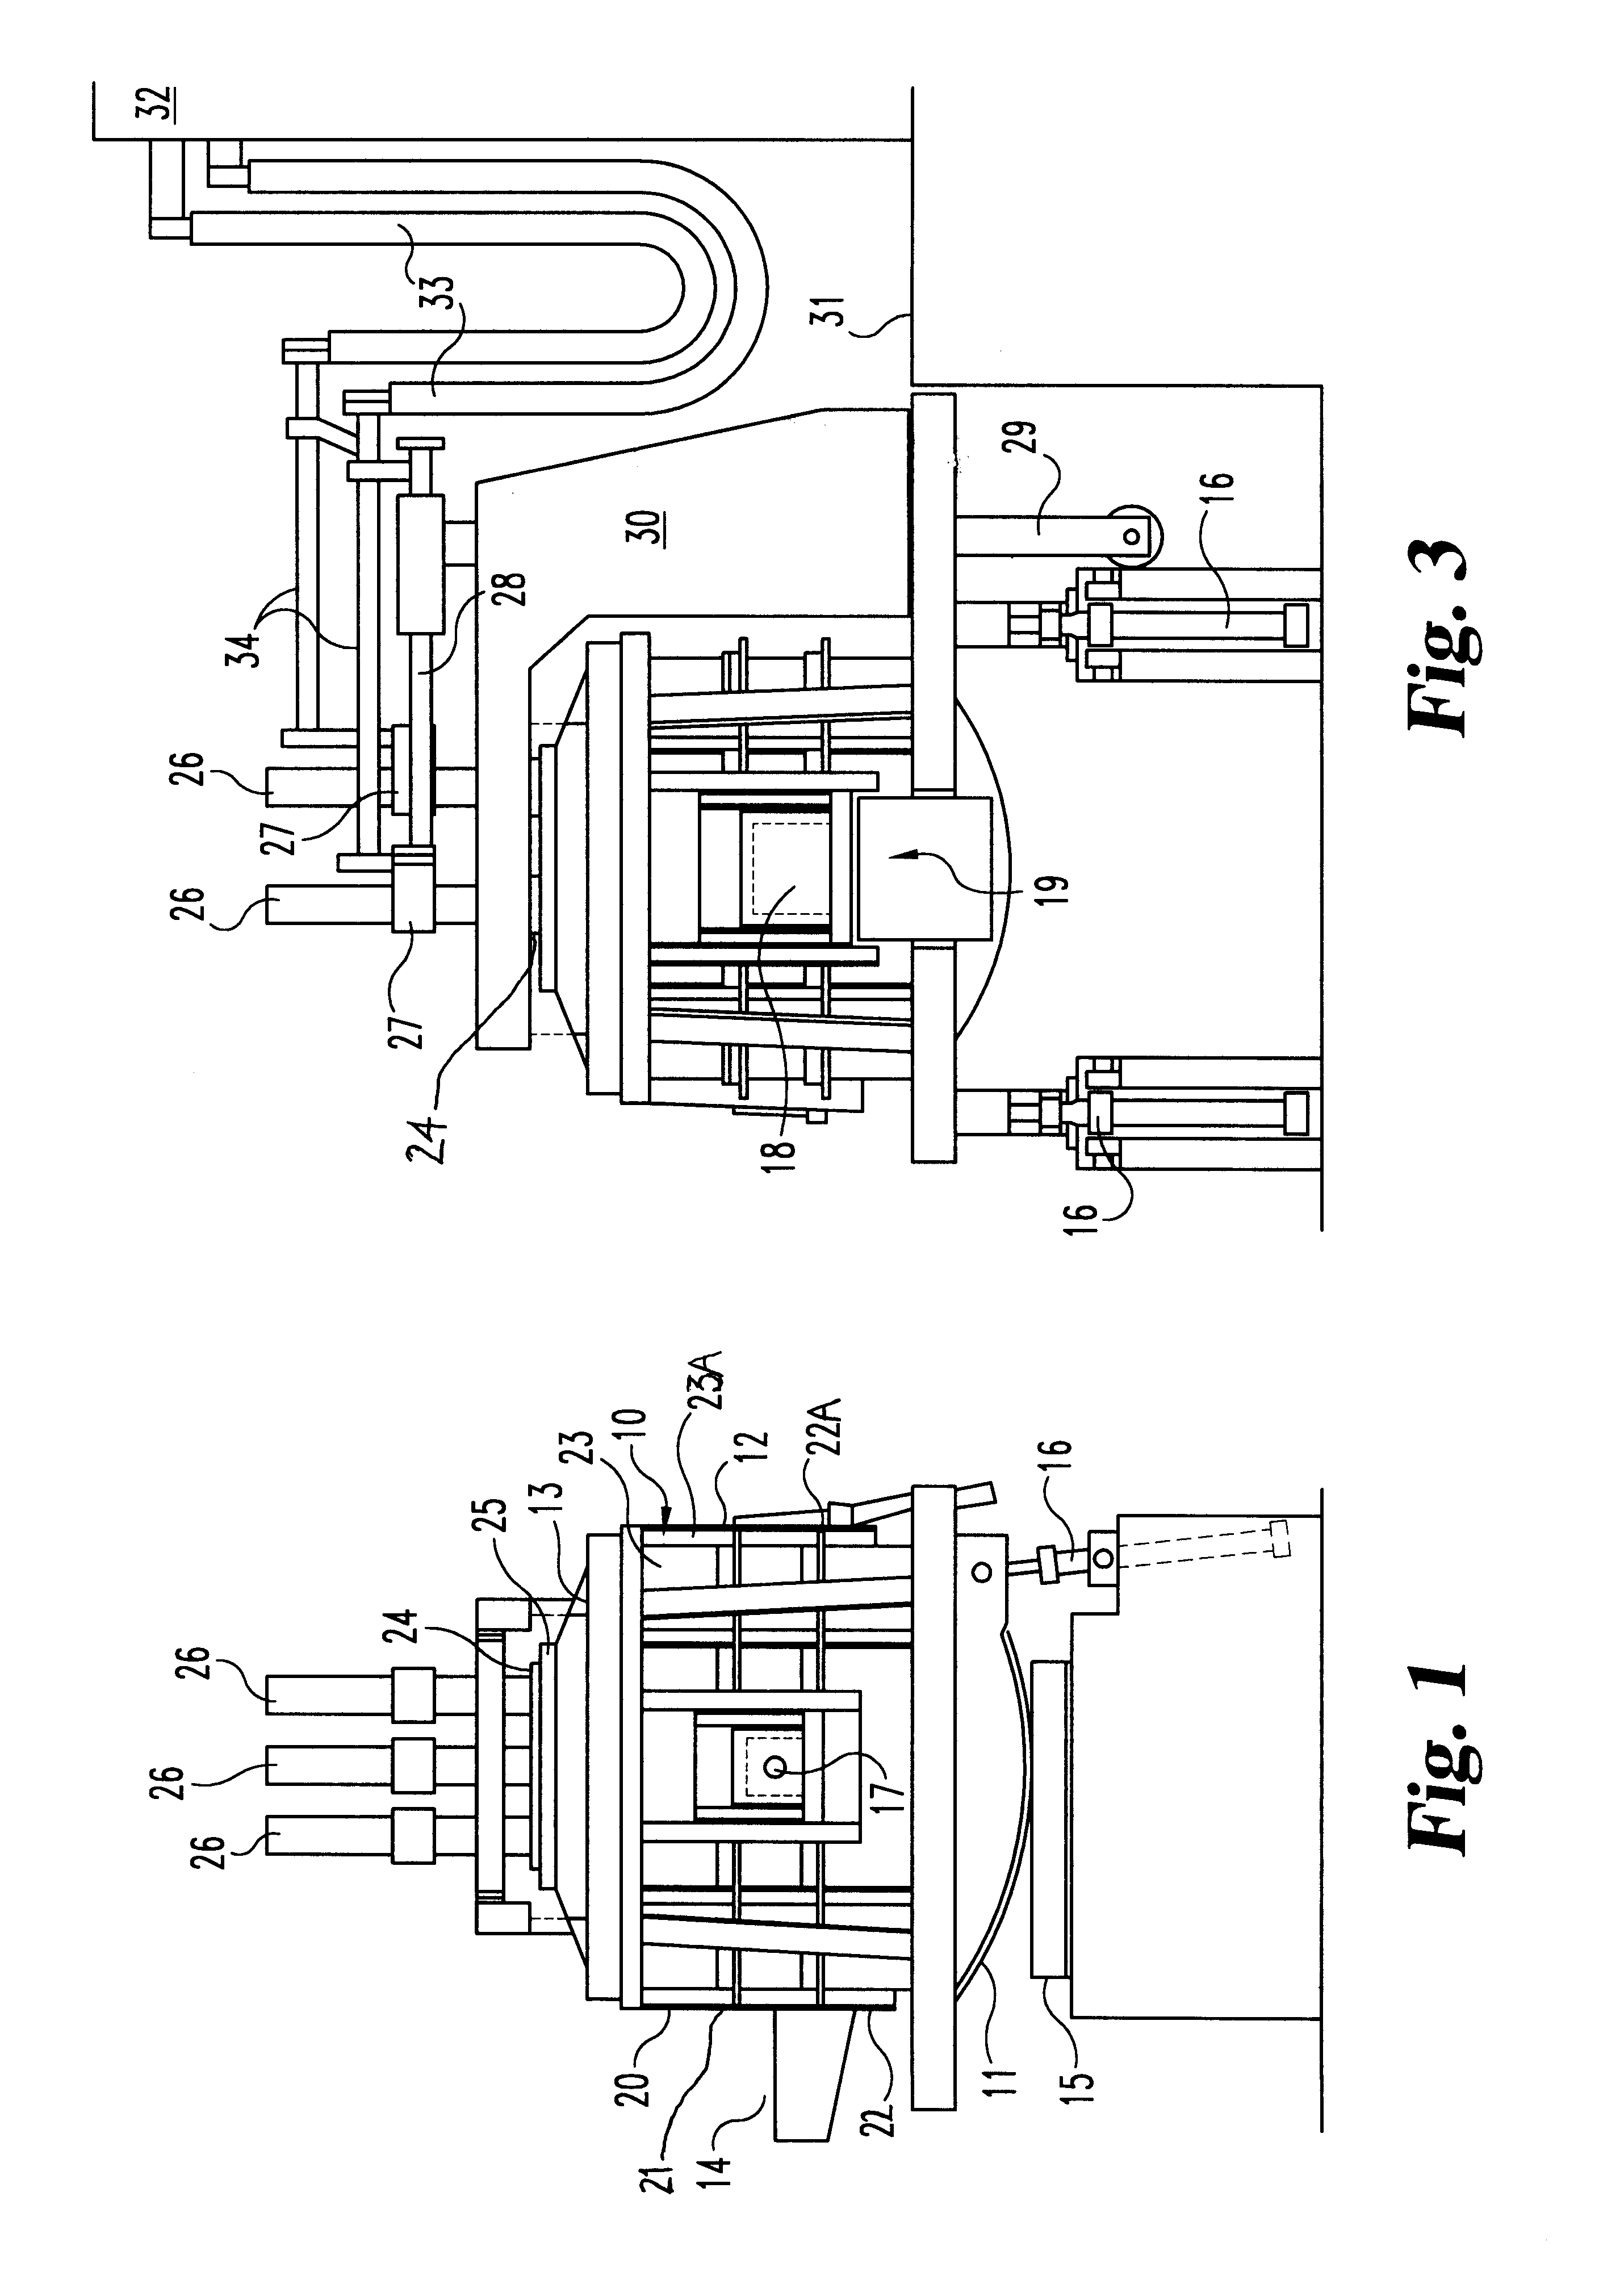 Method for making steel with electric arc furnace